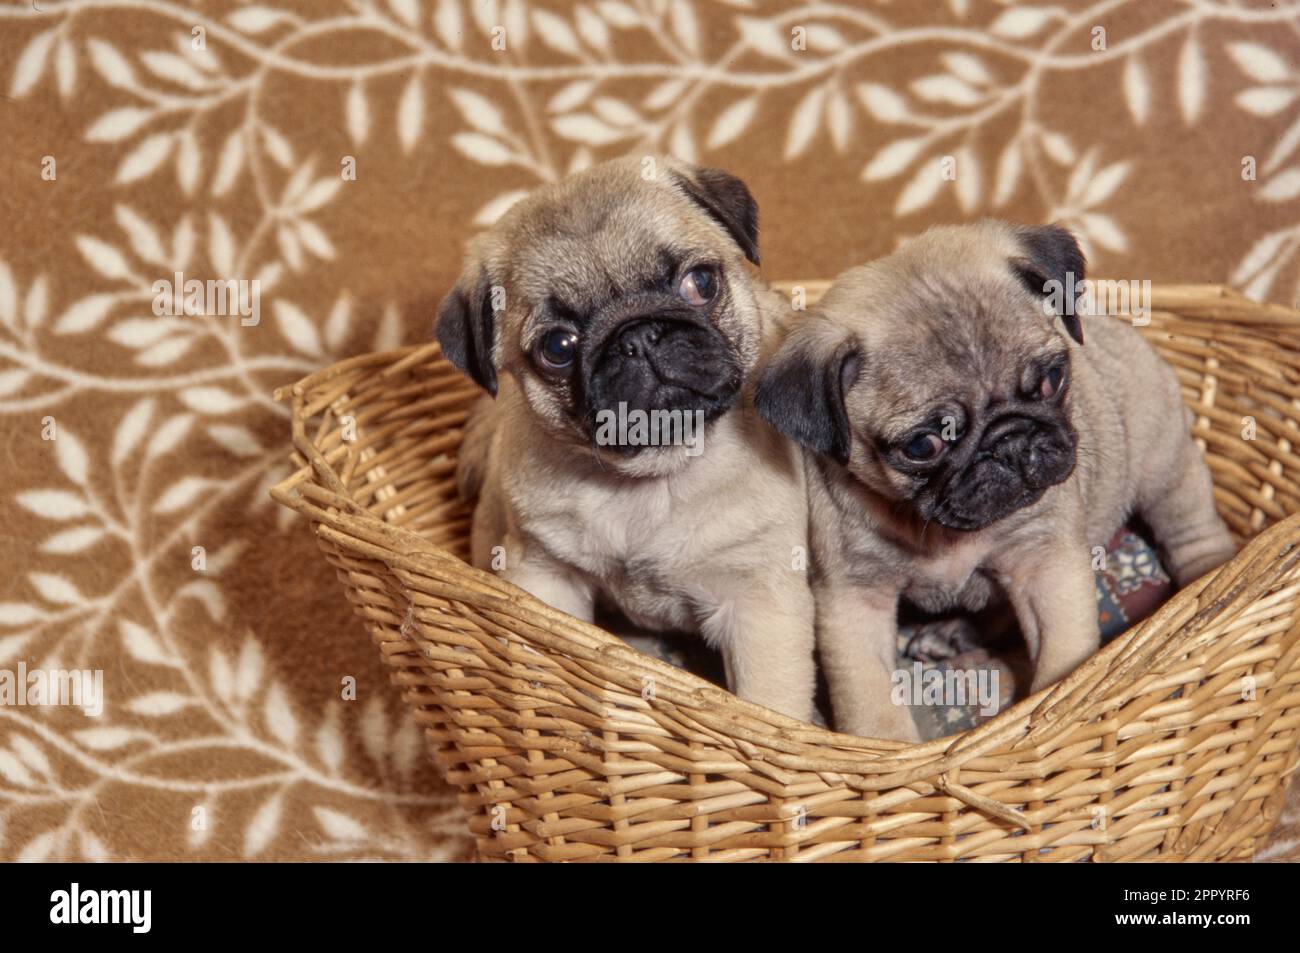 Two pug puppies standing together in wicker dog bed on brown blanket with leaves design Stock Photo